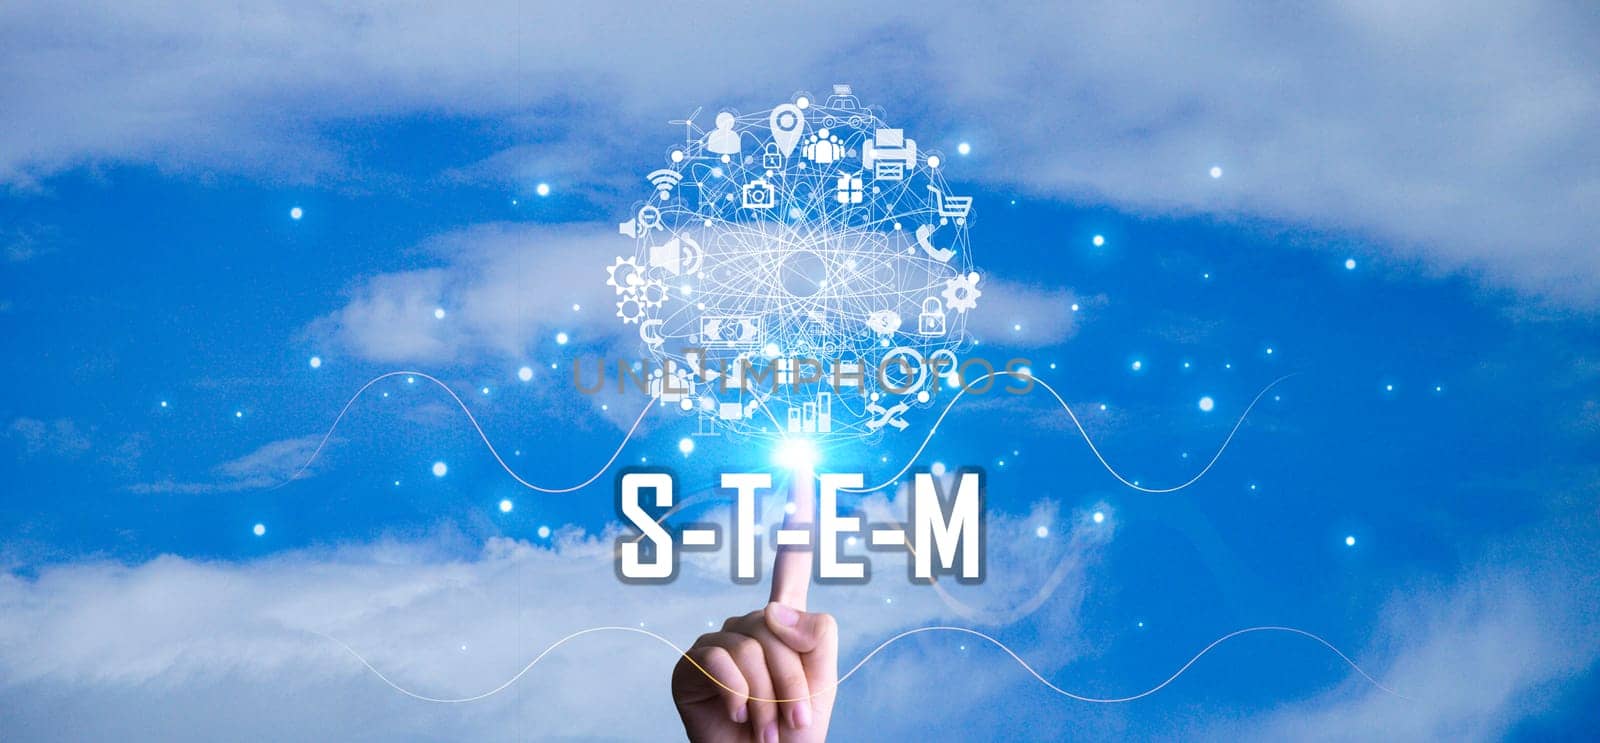 through a network with an emphasis on learners as the center. in teaching and learning Blended style with regular class,stem by boonruen